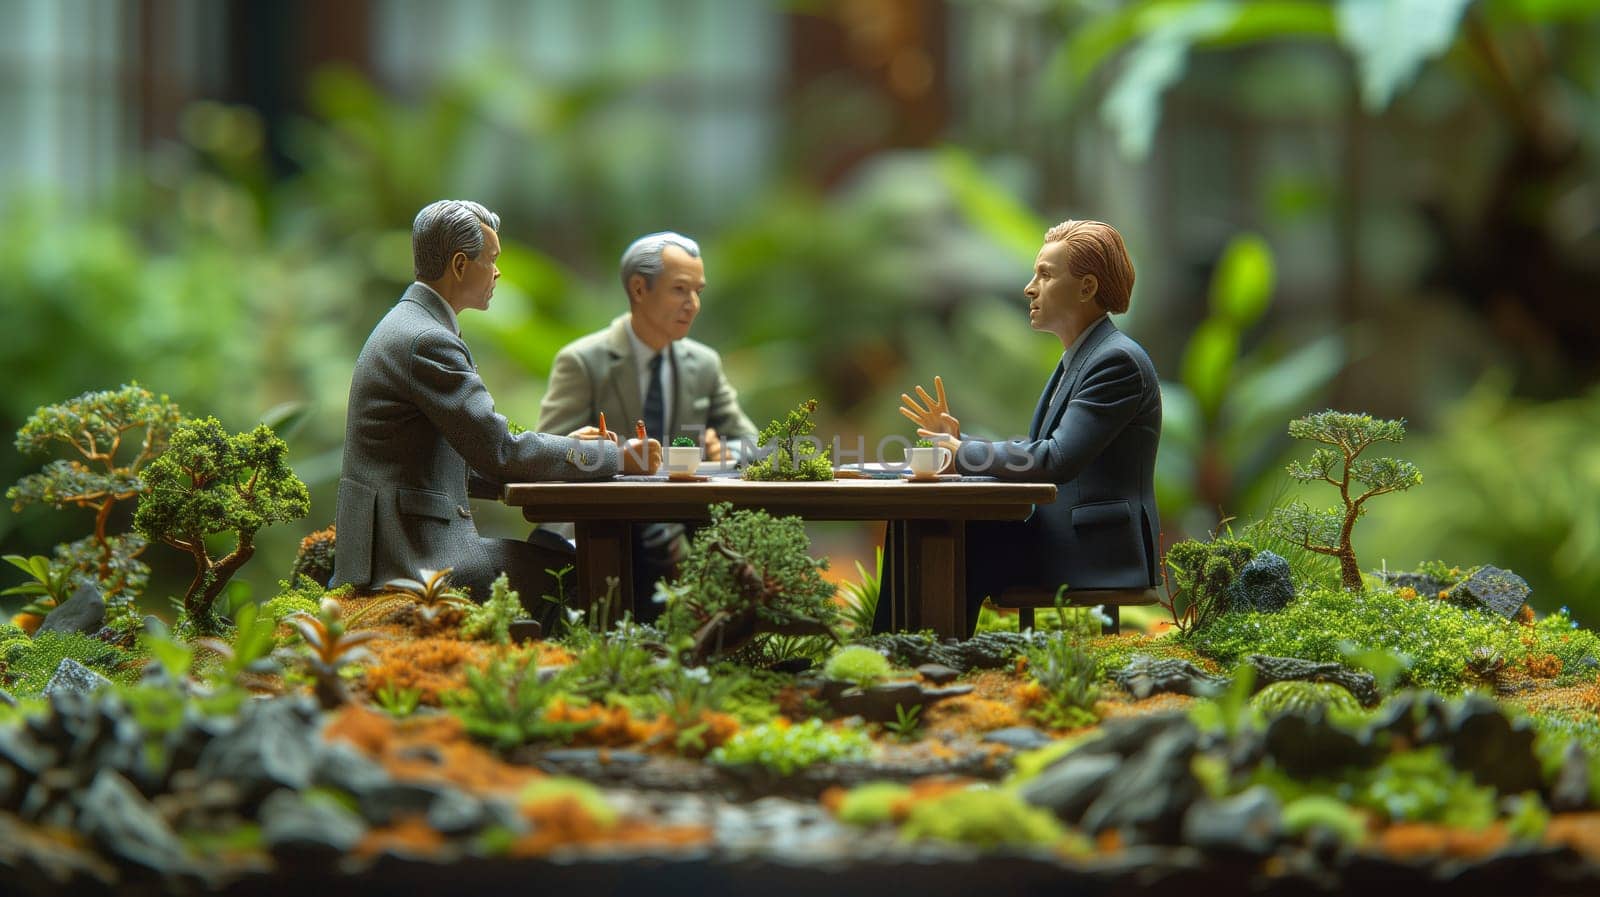 Architectural model of group of friends is gathered around a wooden table in the middle of the forest, surrounded by lush plant life and grass, enjoying leisure and sharing good times in nature